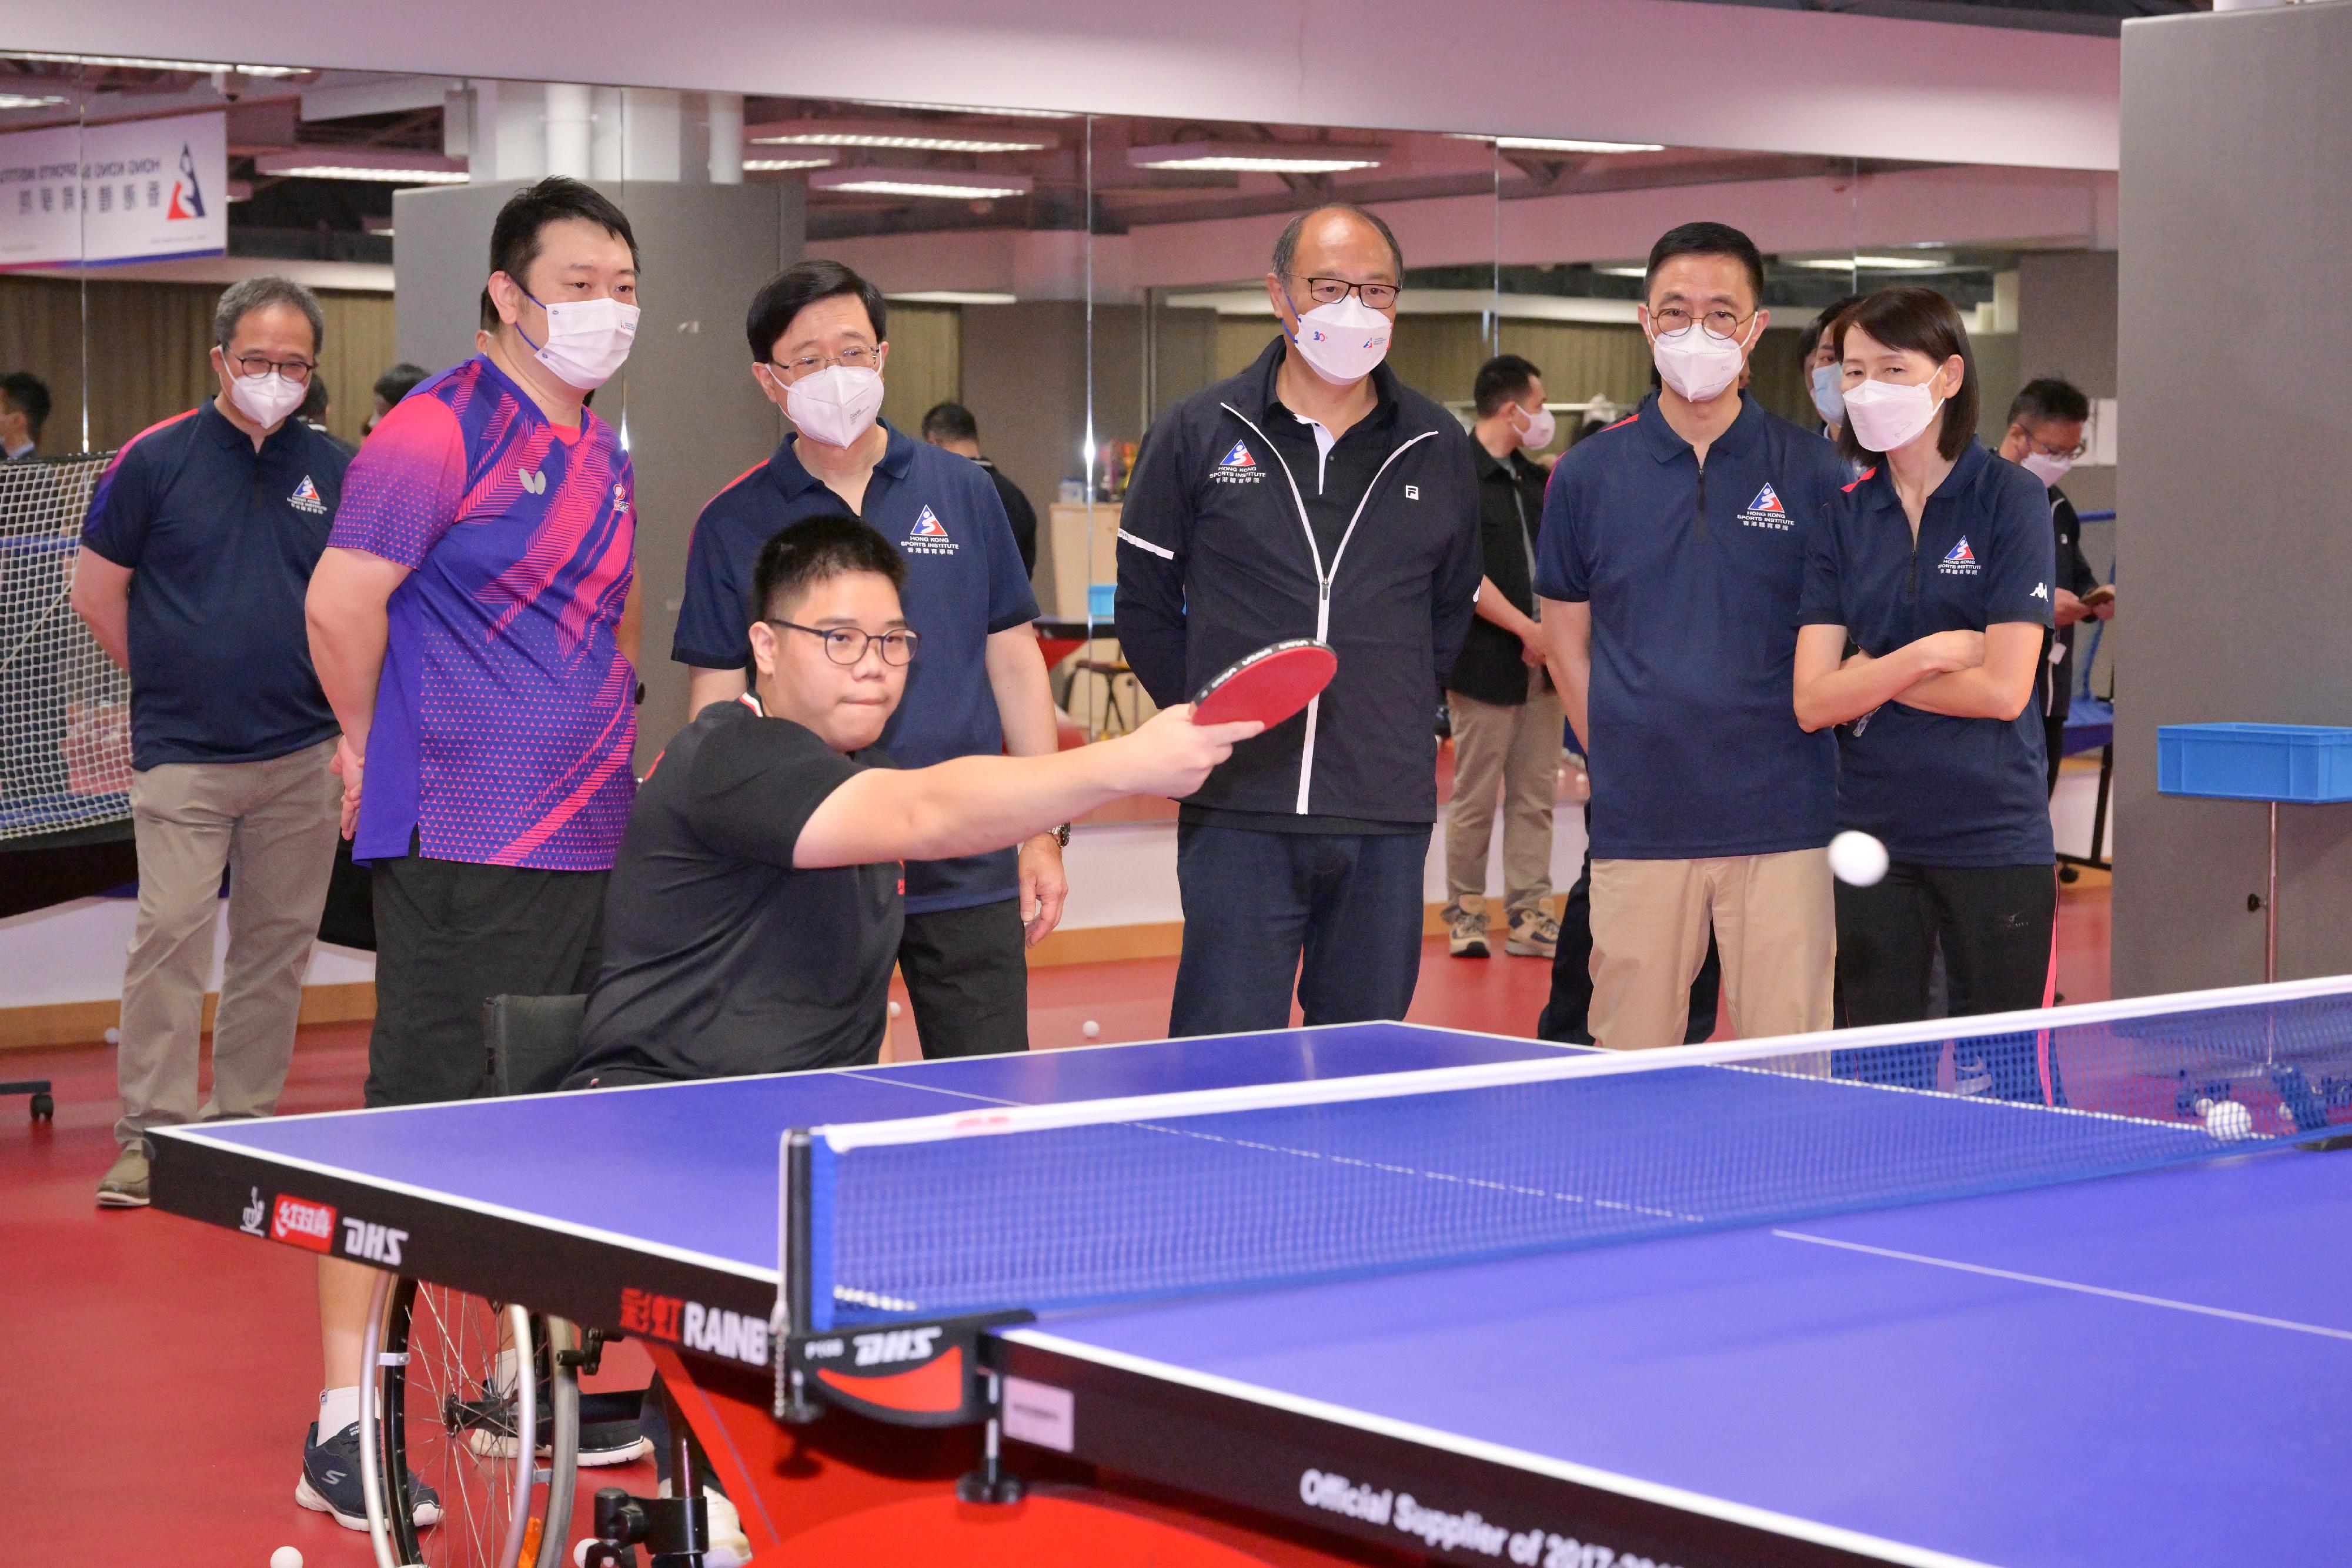 The Chief Executive, Mr John Lee, today (August 16) visited the Hong Kong Sports Institute (HKSI). Photo shows Mr Lee (third left) watching a training session of para table tennis athletes. Looking on are the Secretary for Culture, Sports and Tourism, Mr Kevin Yeung (second right); the Director of the Chief Executive's Office, Ms Carol Yip (first right); and the Chairman of the Board of Directors of the HKSI, Dr Lam Tai-fai (third right).